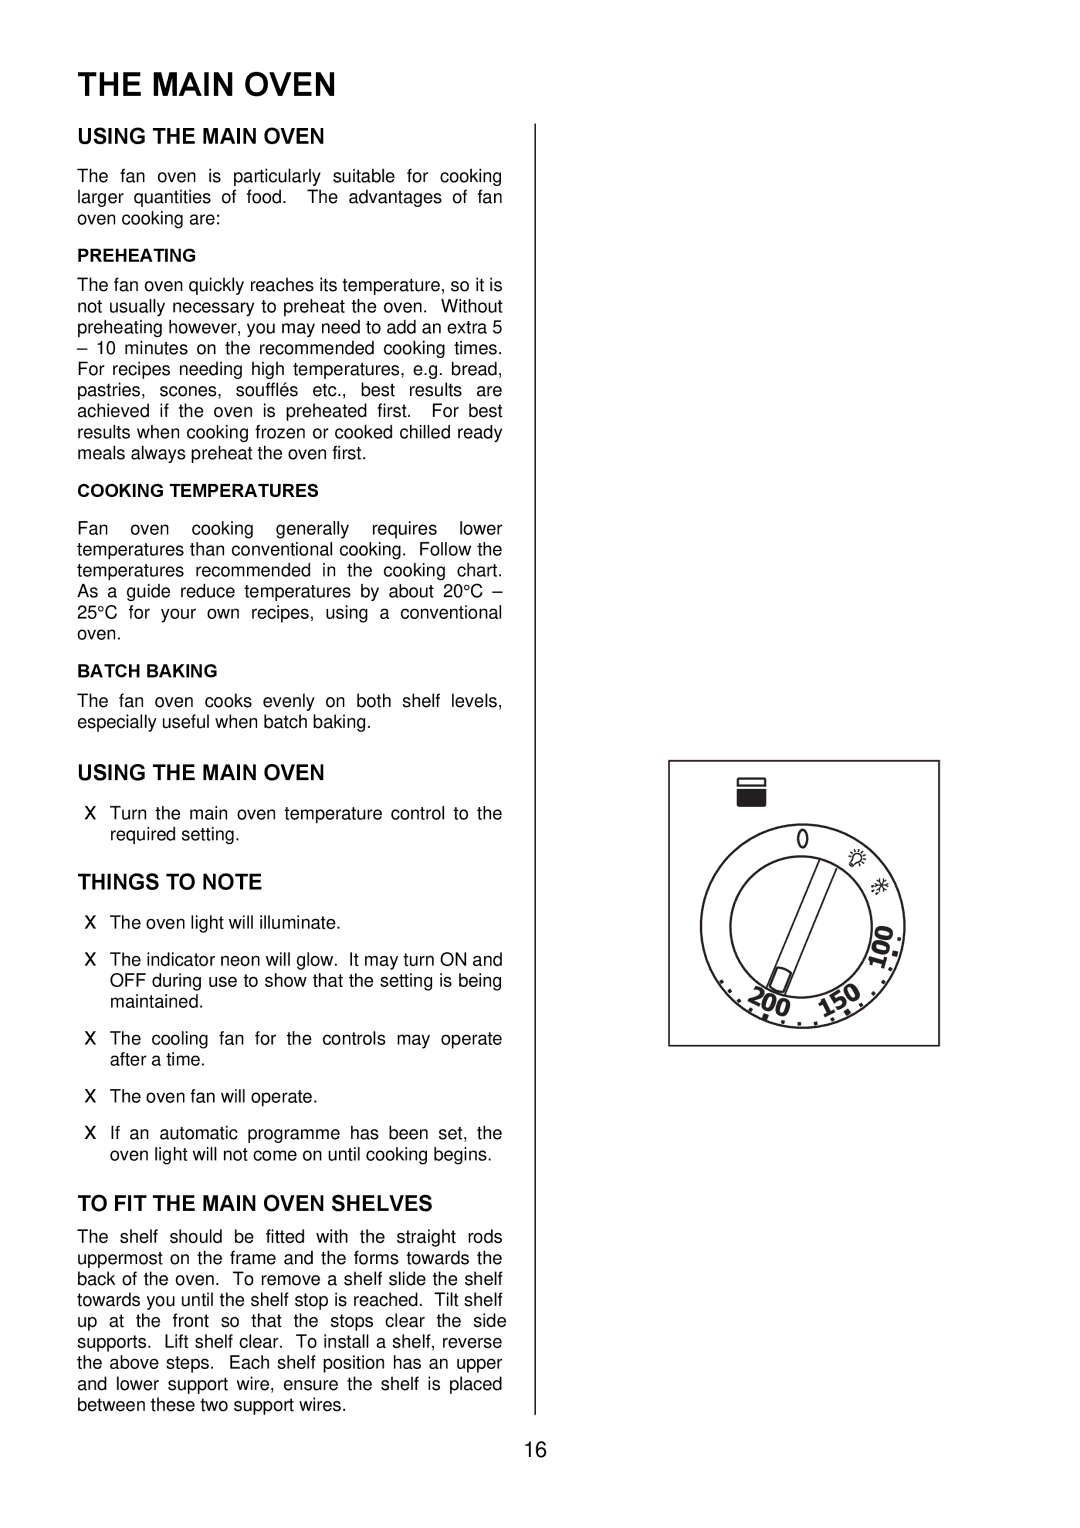 Electrolux EKM6047 user manual Using the Main Oven, To FIT the Main Oven Shelves 